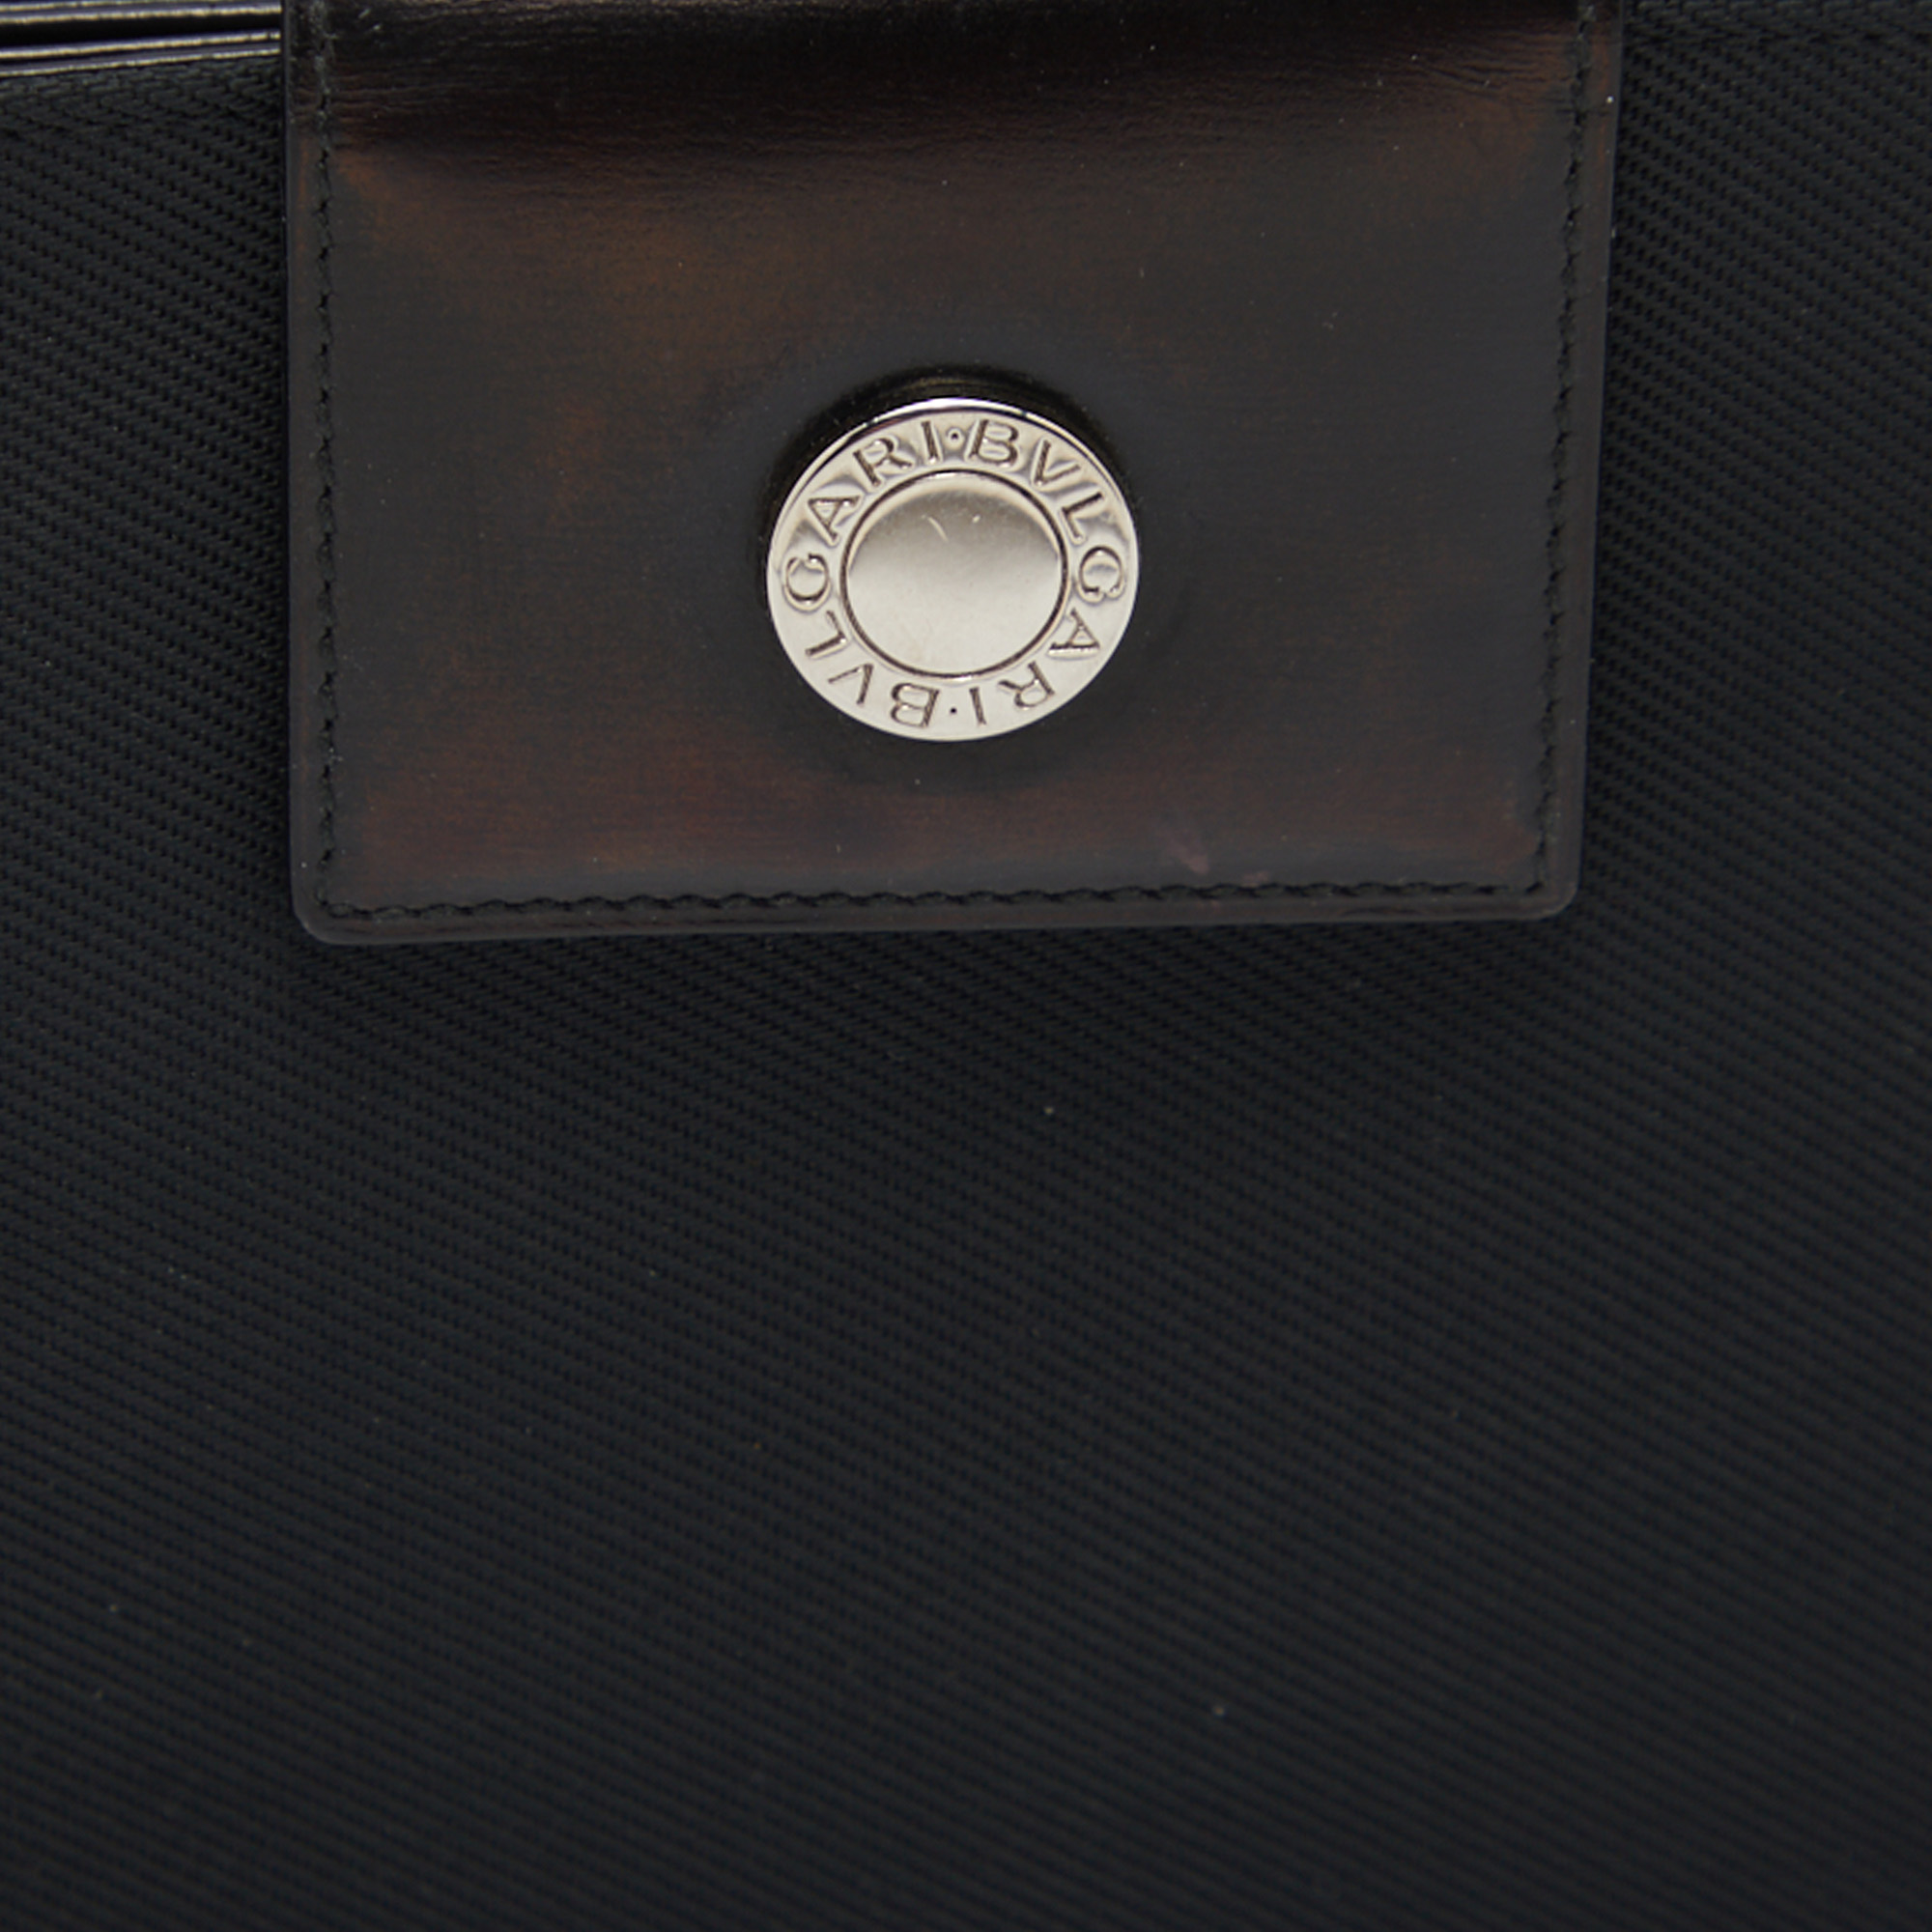 Bvlgari Black Canvas And Leather Compact Wallet